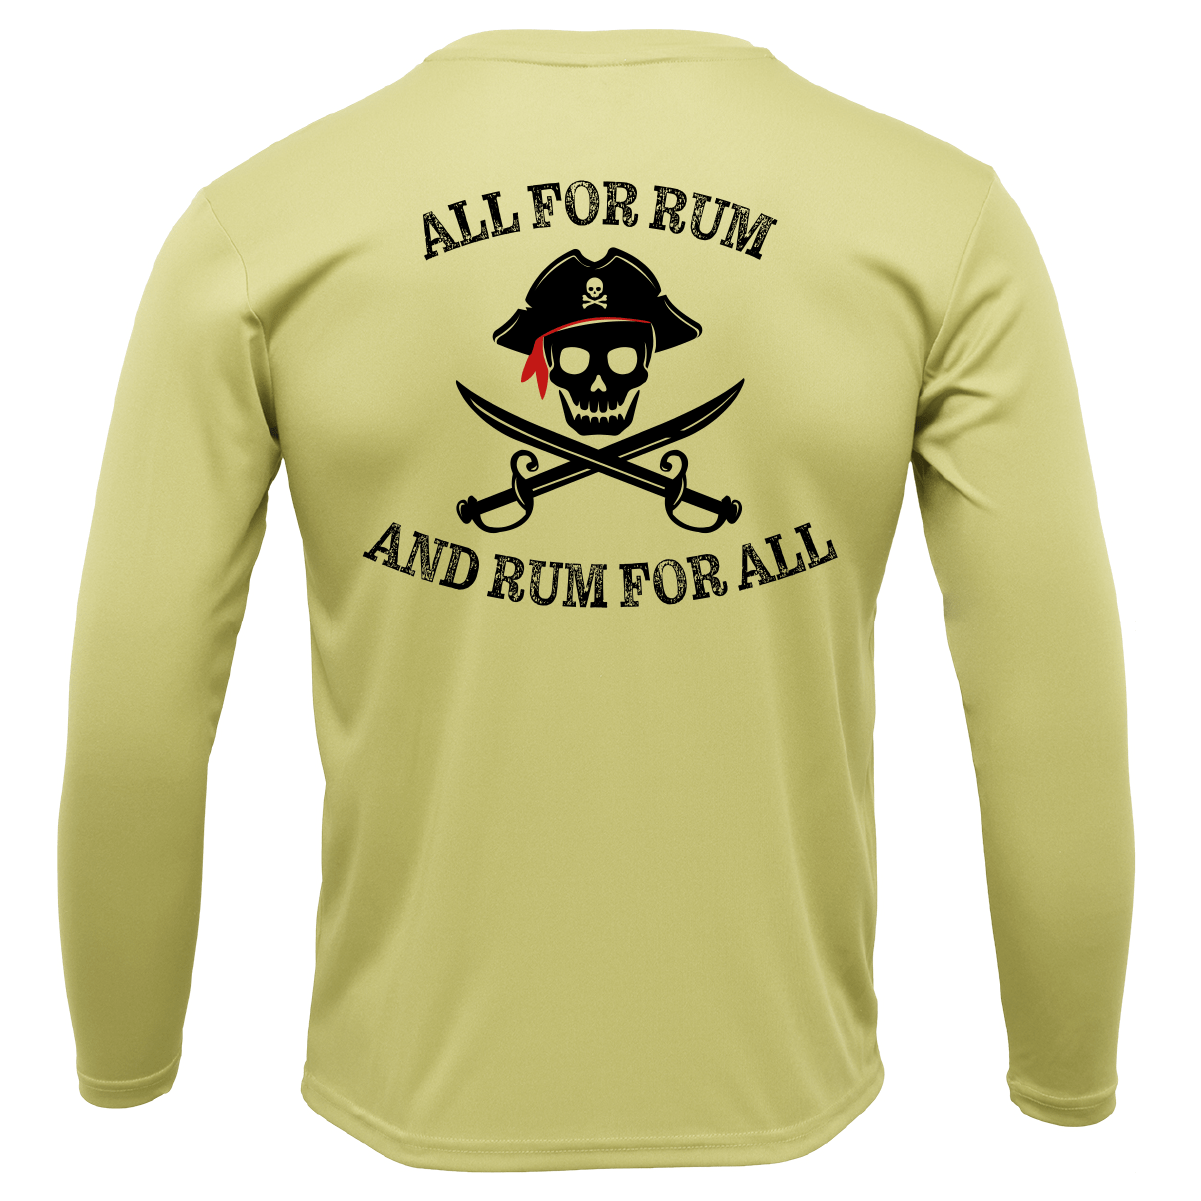 Saltwater Born Shirts M / CANARY Saltwater Born "All for Rum and Rum for All" Long Sleeve UPF 50+ Dry-Fit Shirt